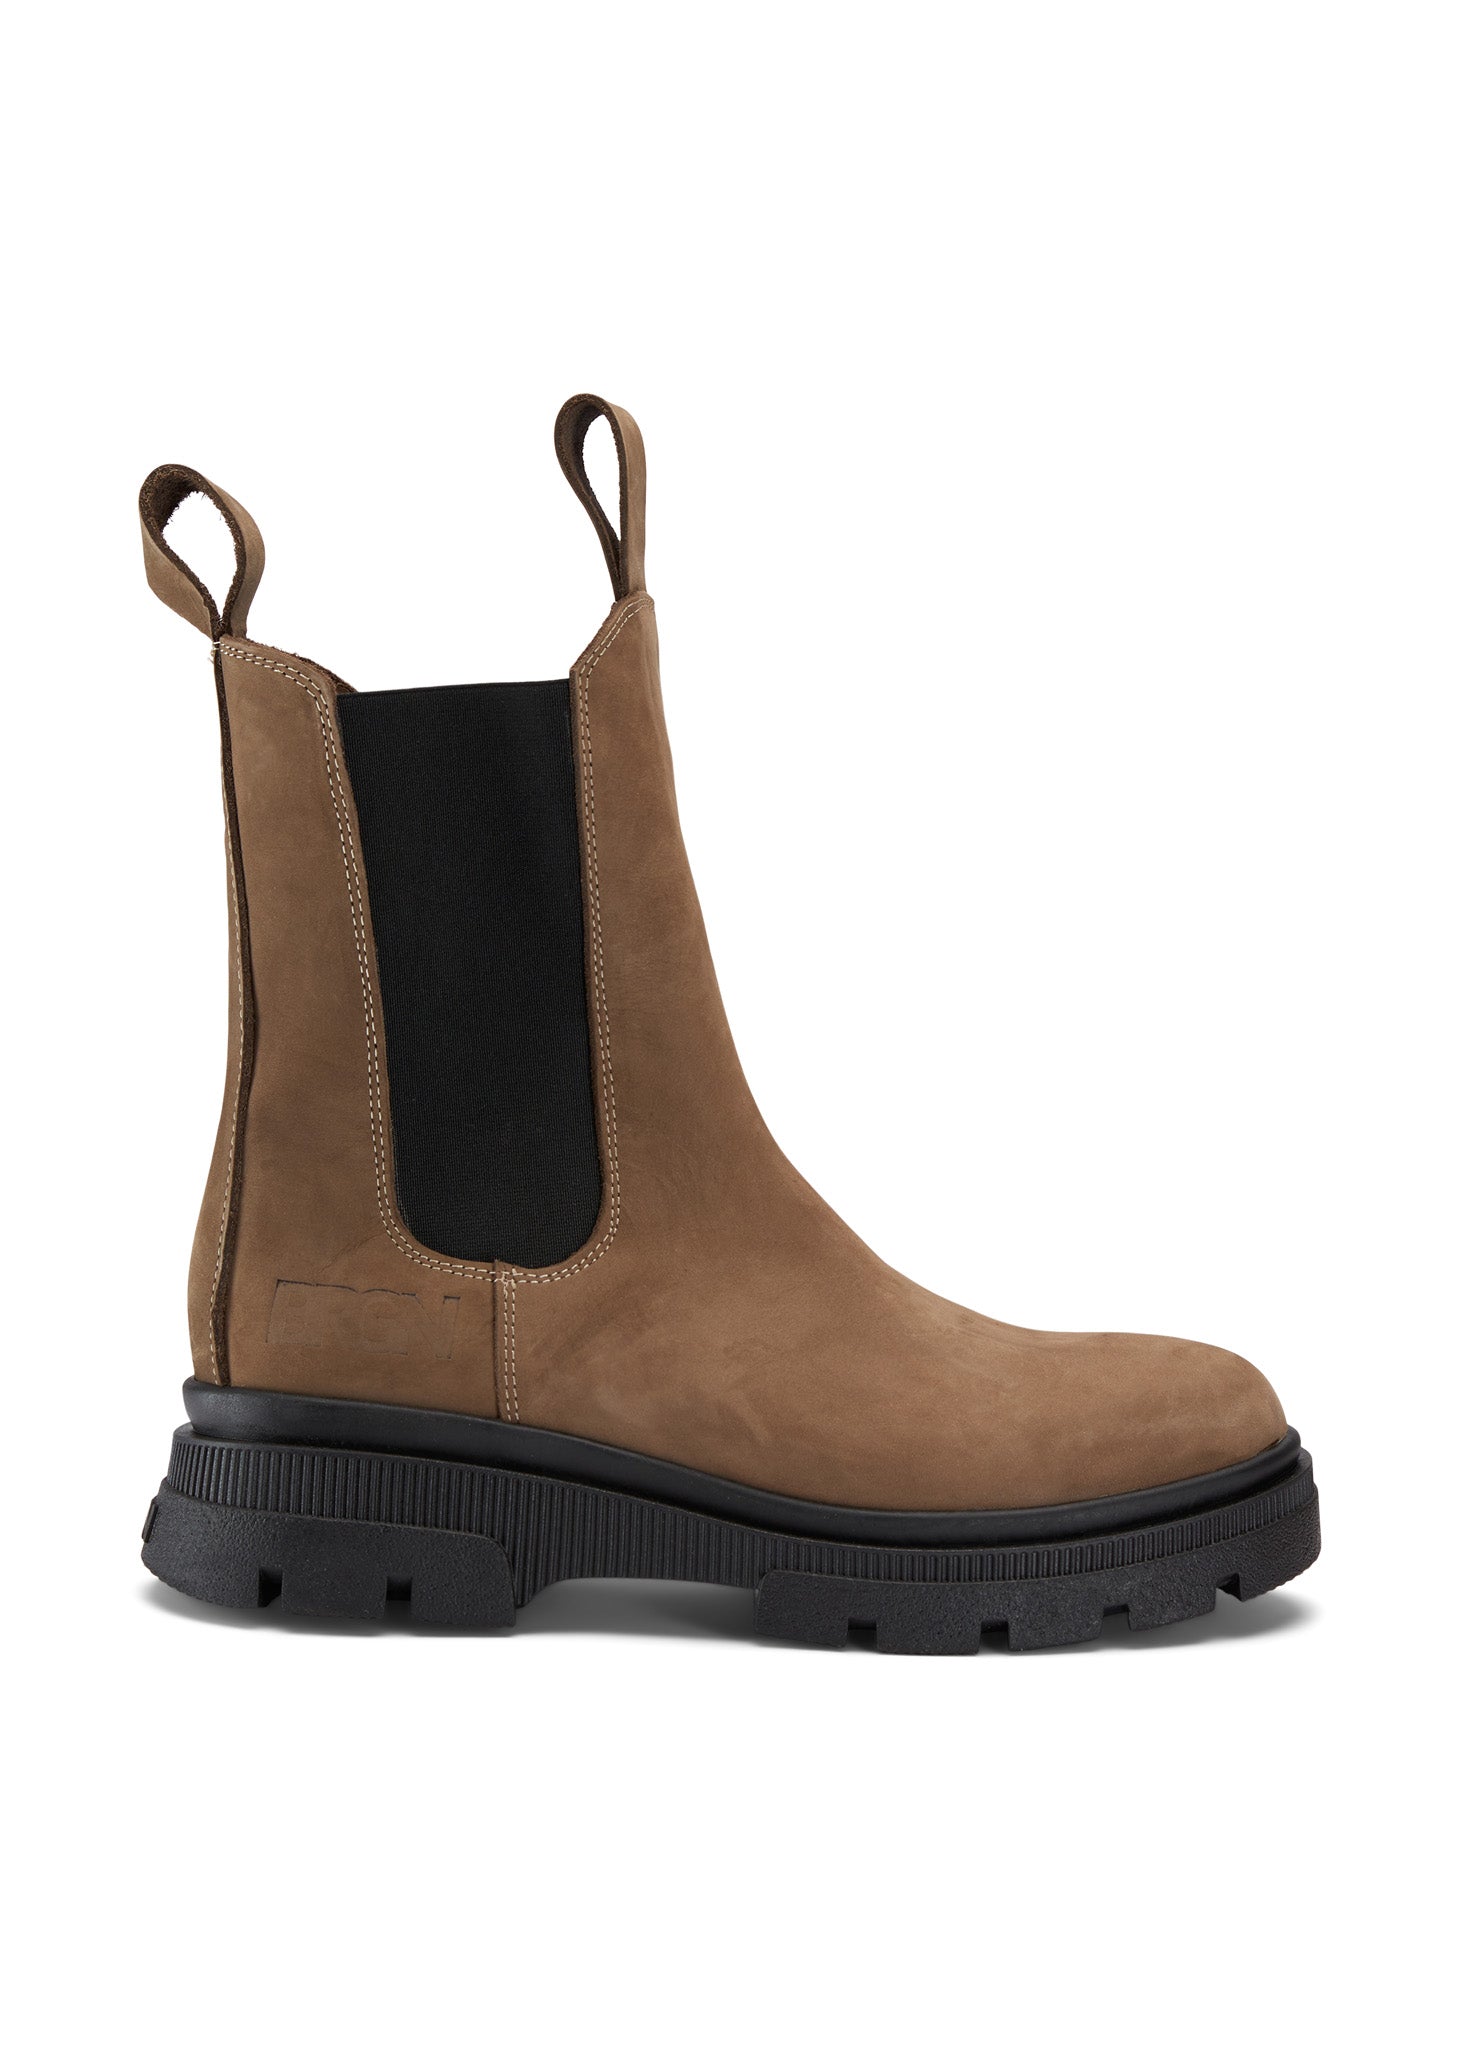 BRGN Chelsea Boot Shoes 145 Camel